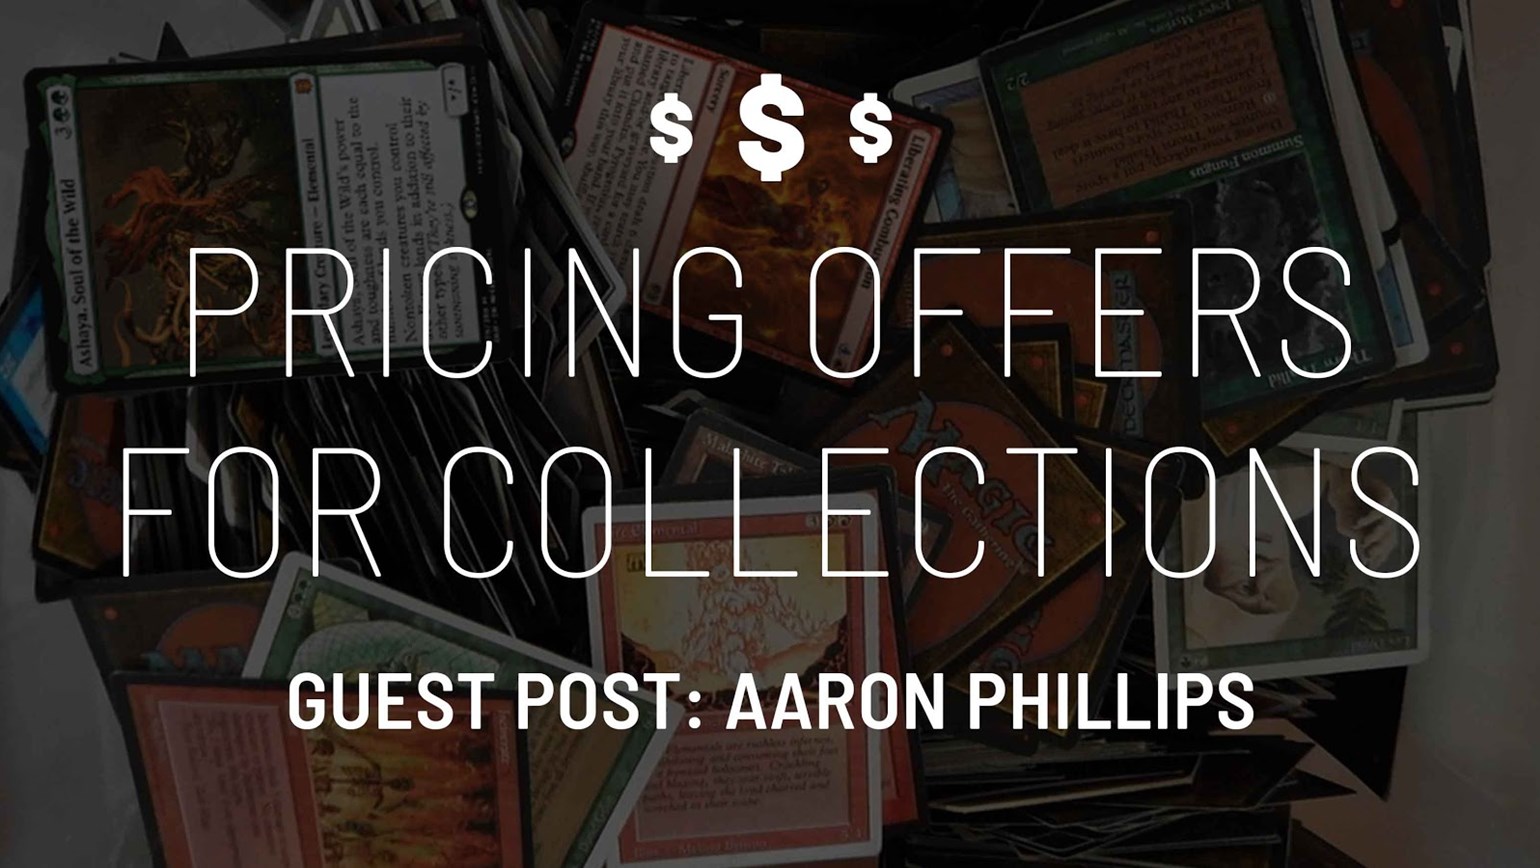 How to Price Offers for Collections